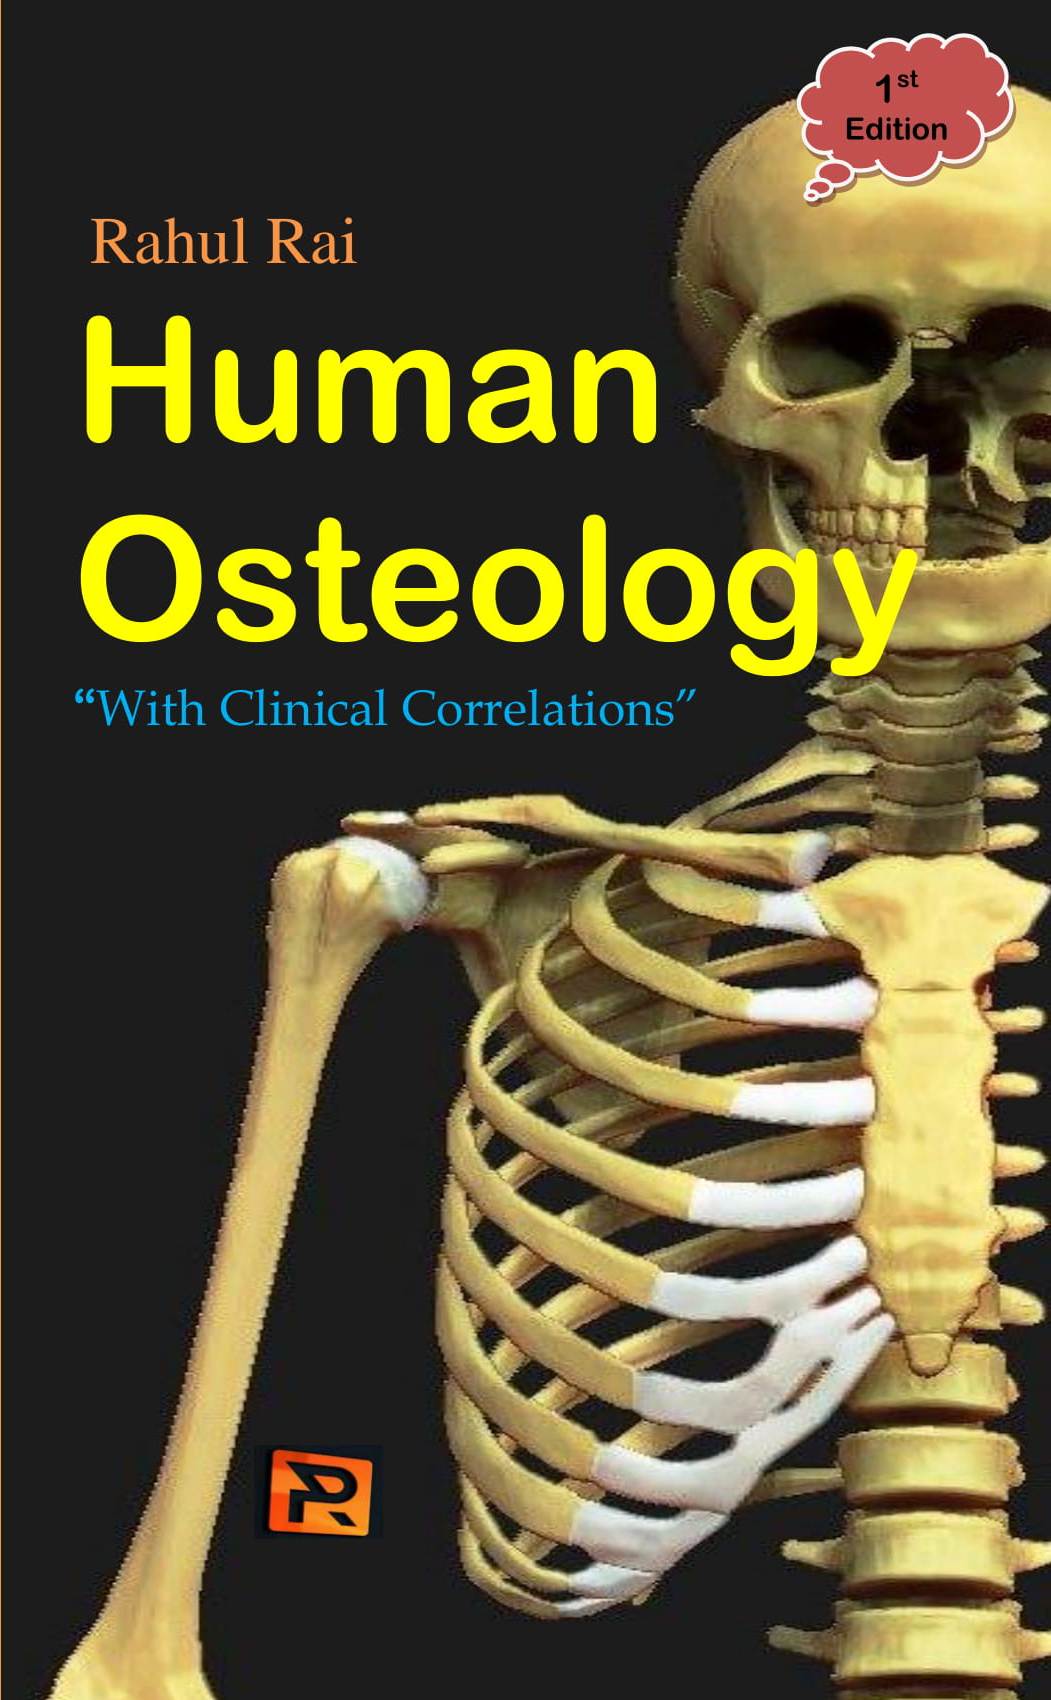 Human Osteology (with clinical correlations)